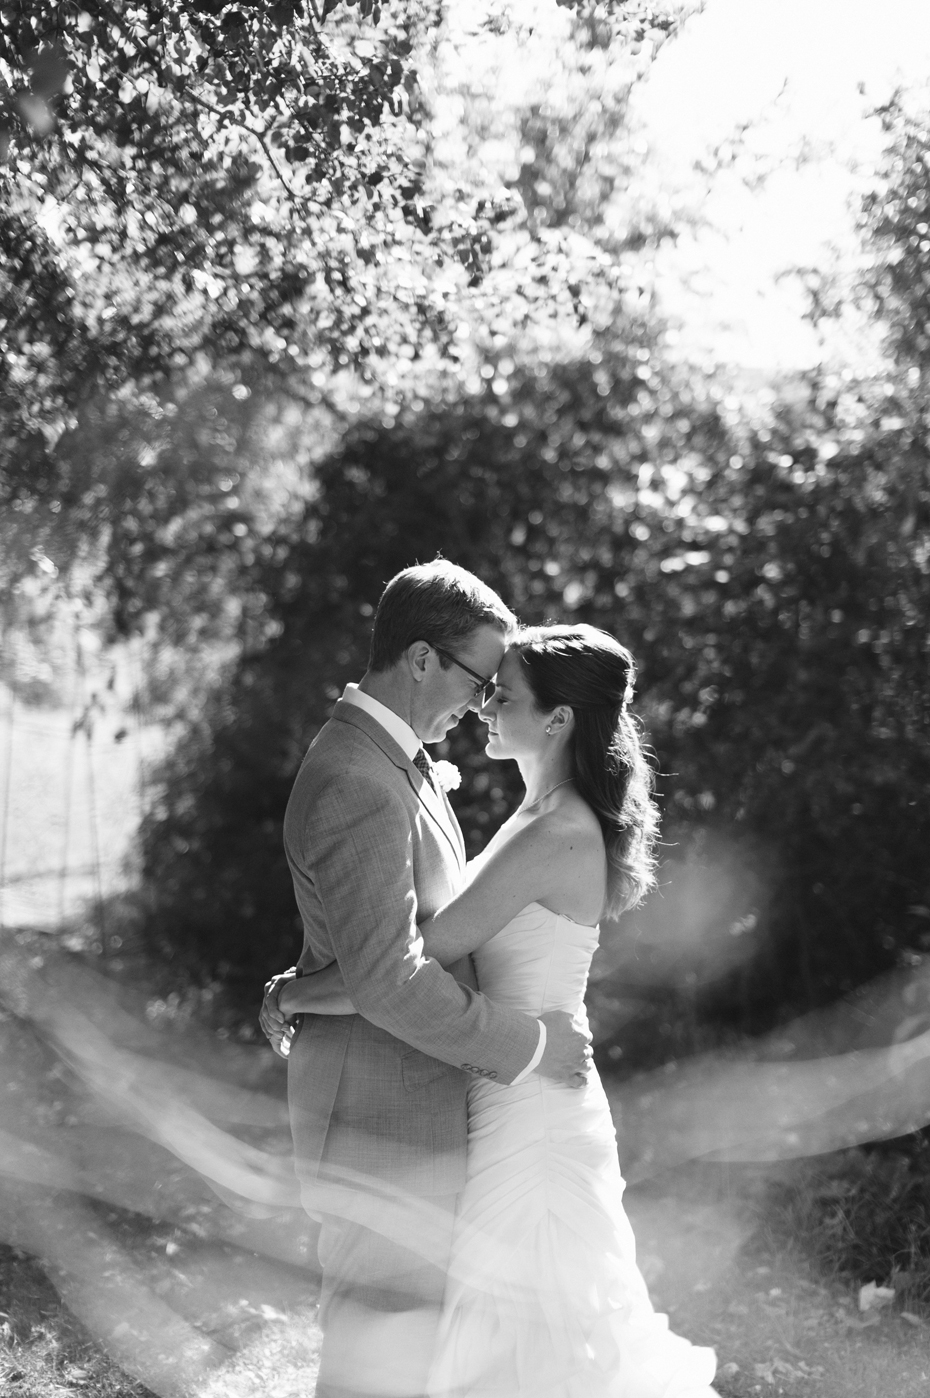 Black and white bride and groom portrait at Misty Farms by photojournalistic Michigan wedding photographer Heather Jowett.